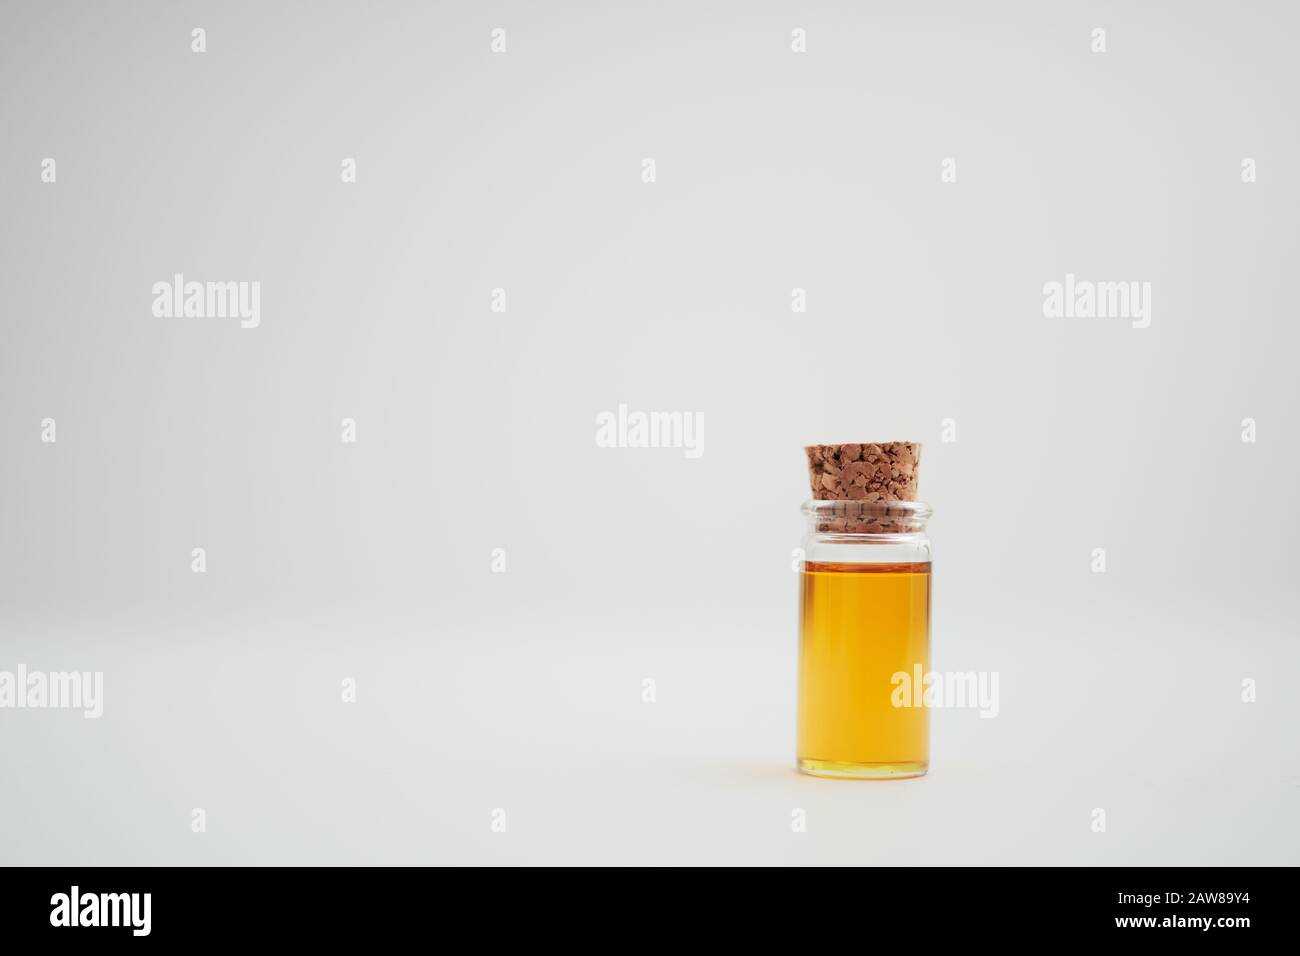 A sample of walnut oil in a glass bottle with a cork Stock Photo